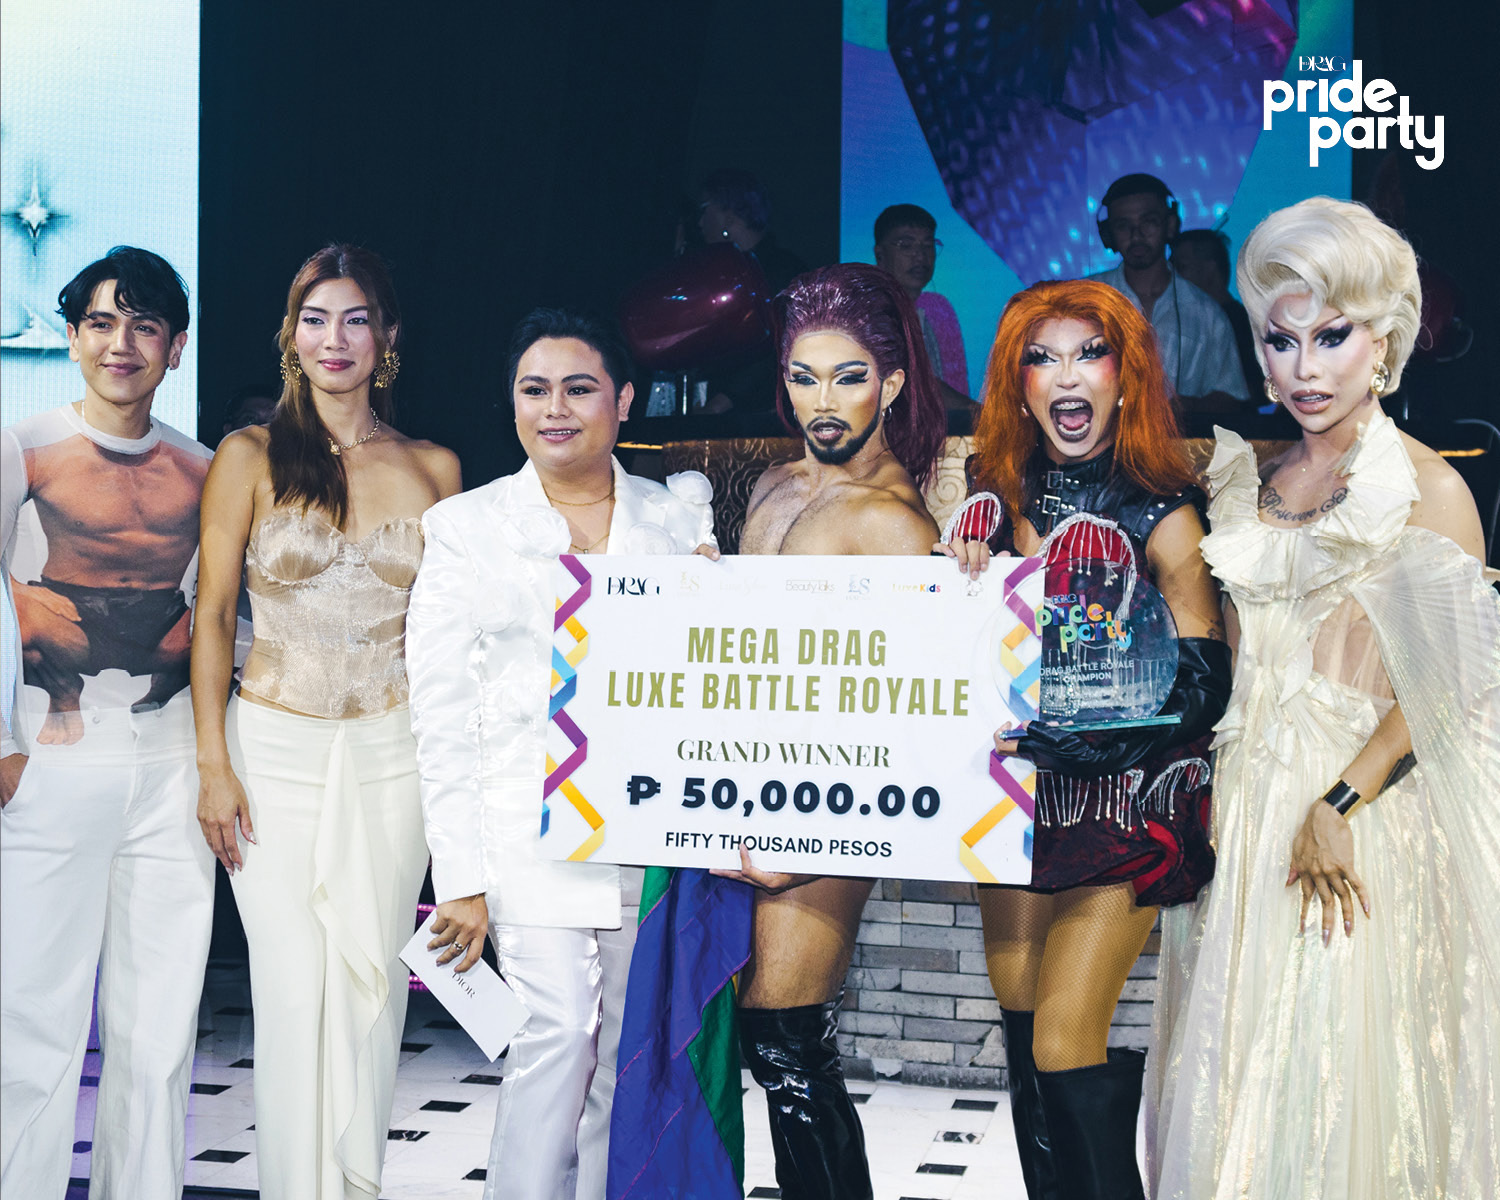 MEGA Drag Pride Party Luxe Beauty Battle Royale BJ Pascual, Nicole Cordoves, Luxe Beauty and Wellness Group Chief of Staff RJ Macaraig, Bomba Ding, Felicia Ding, and Eva Le Queen